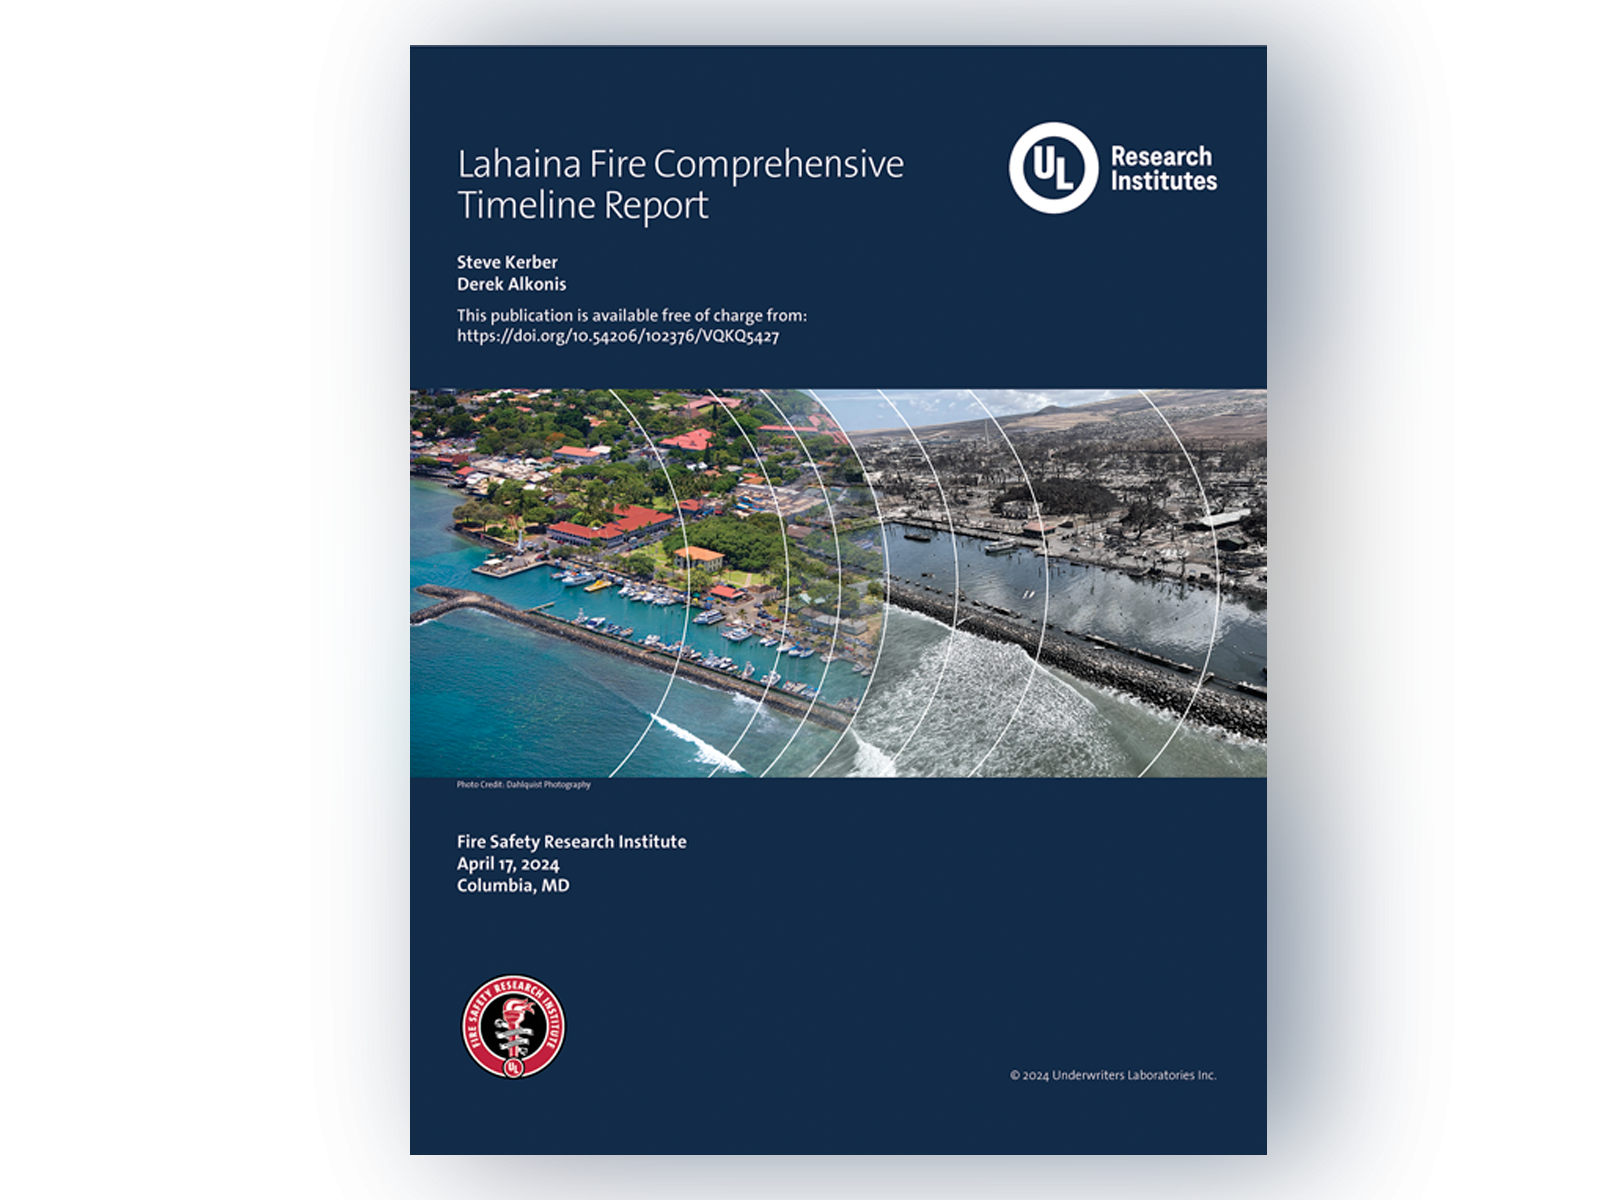 Lahaina Fire Comprehensive Timeline Report Cover